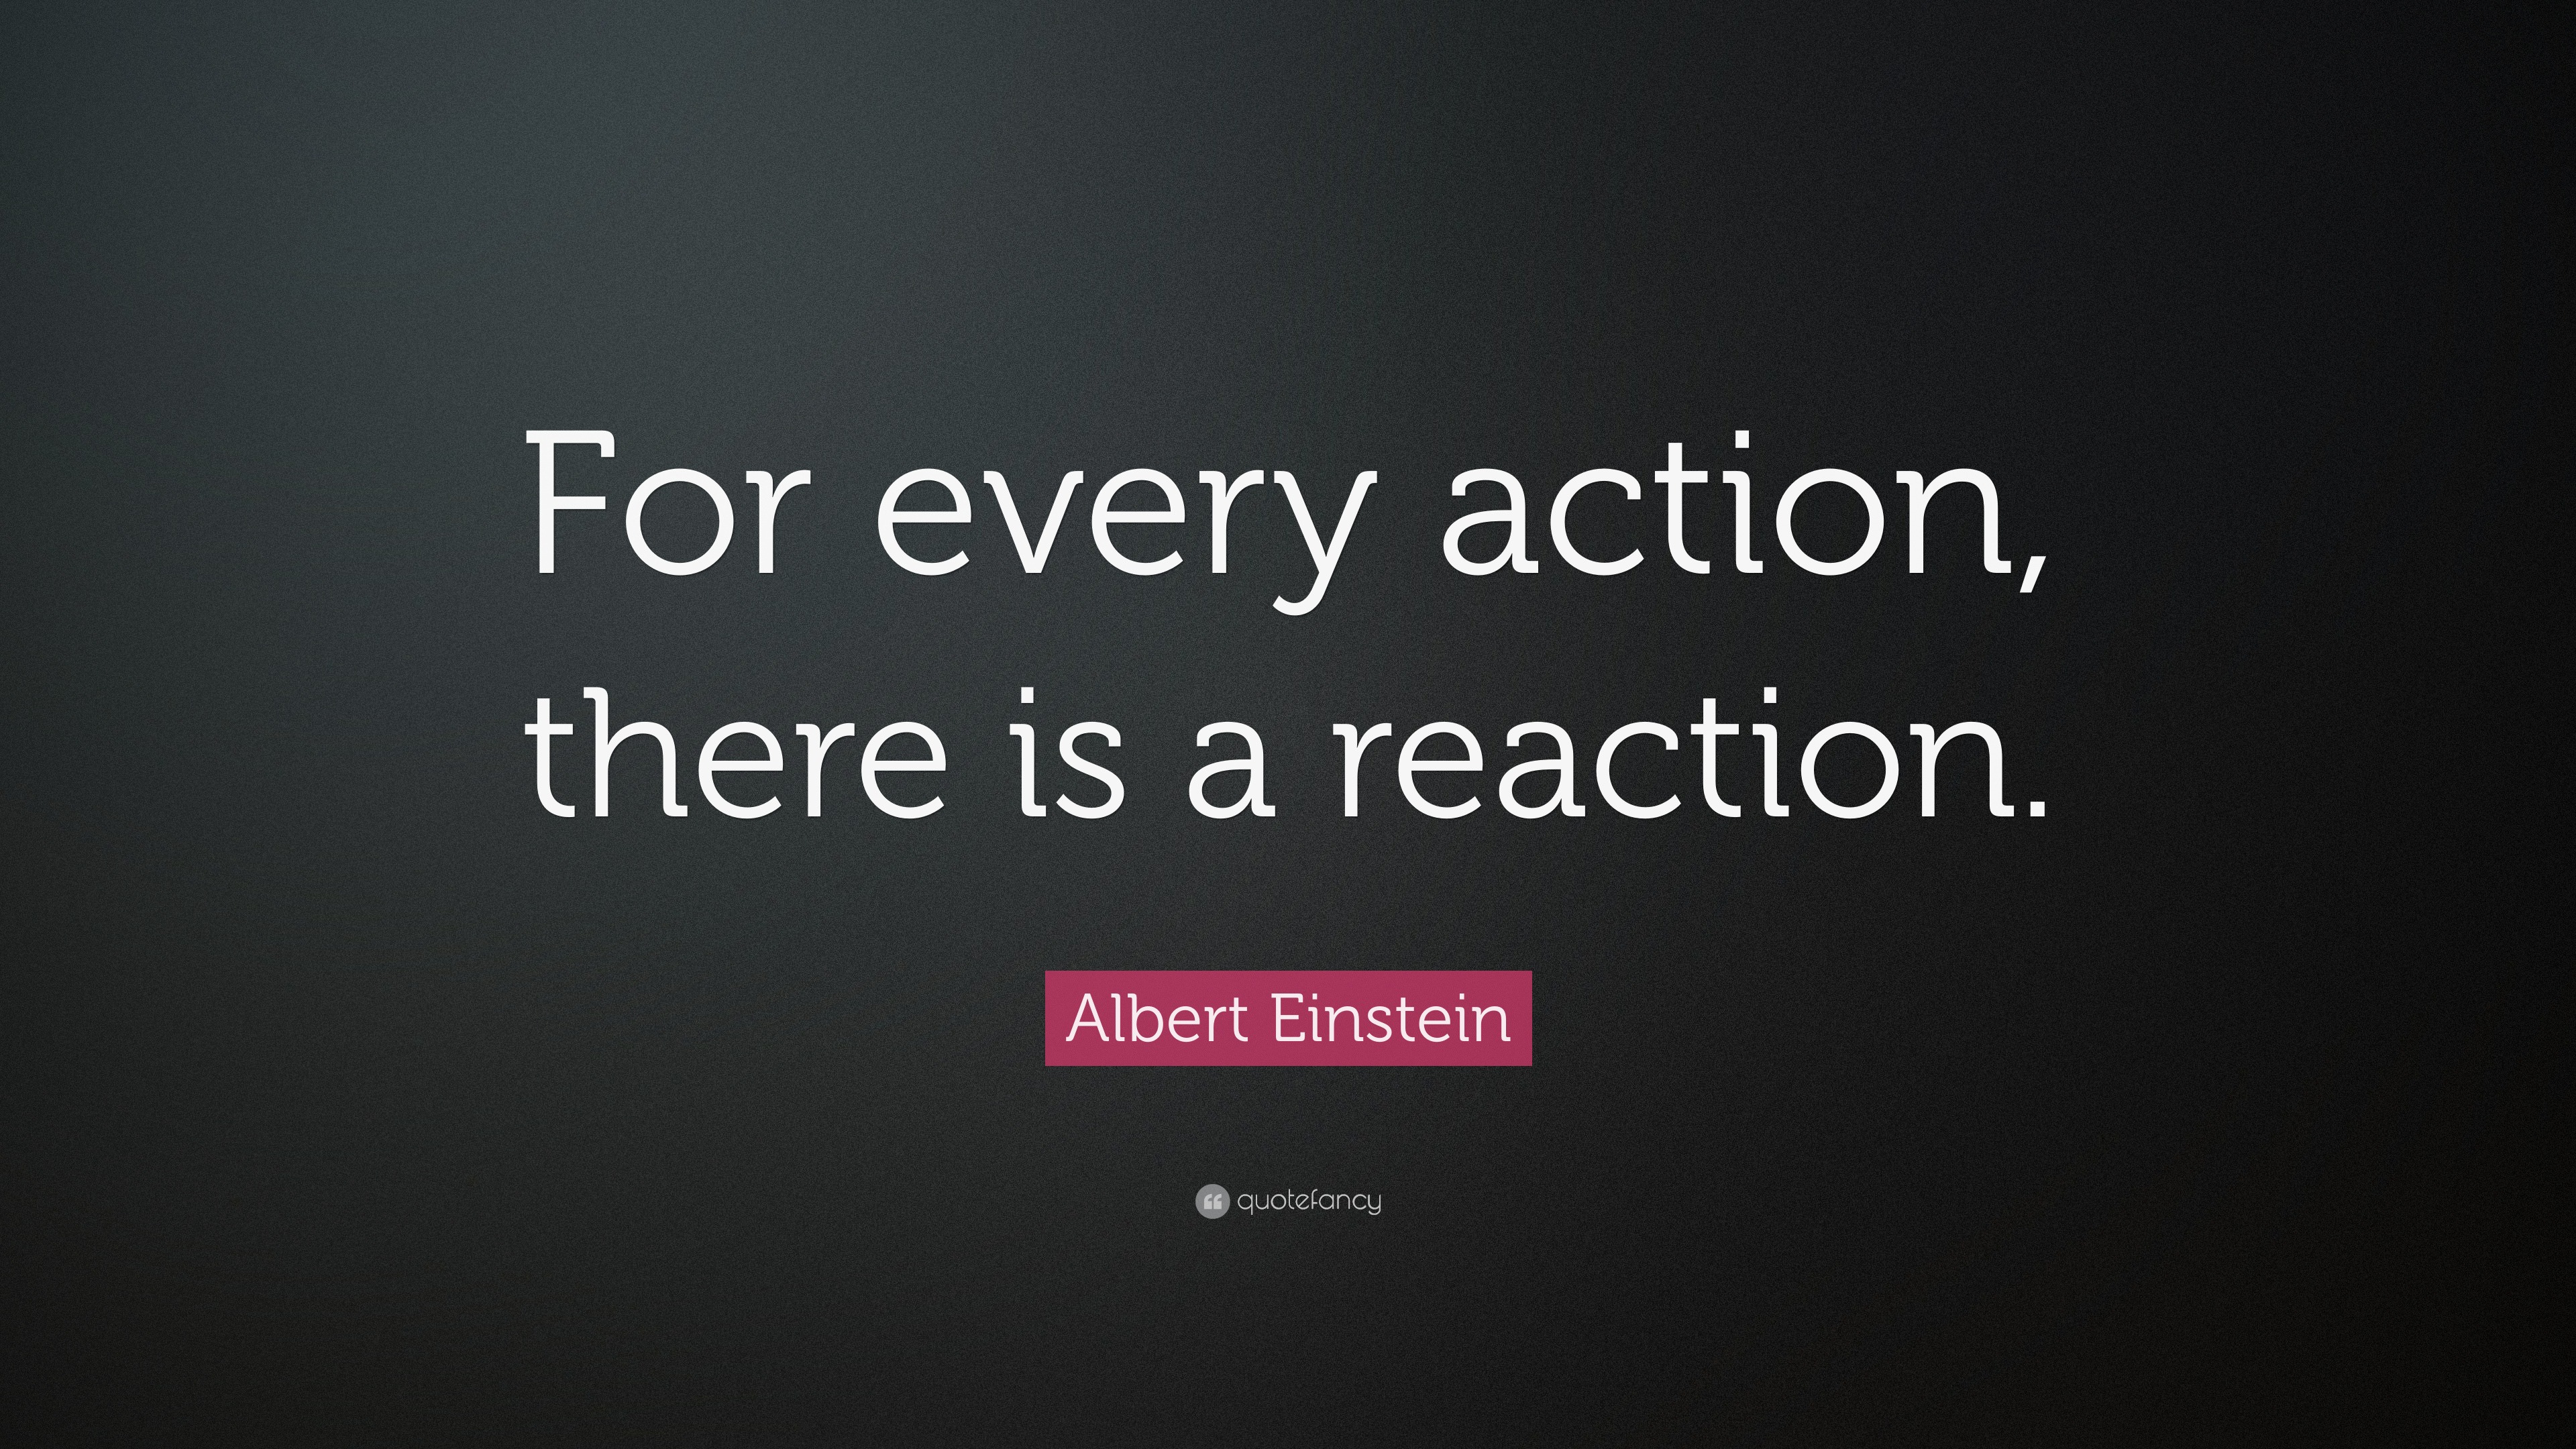 Albert Einstein Quote: "For every action, there is a reaction." (9 wallpapers) - Quotefancy